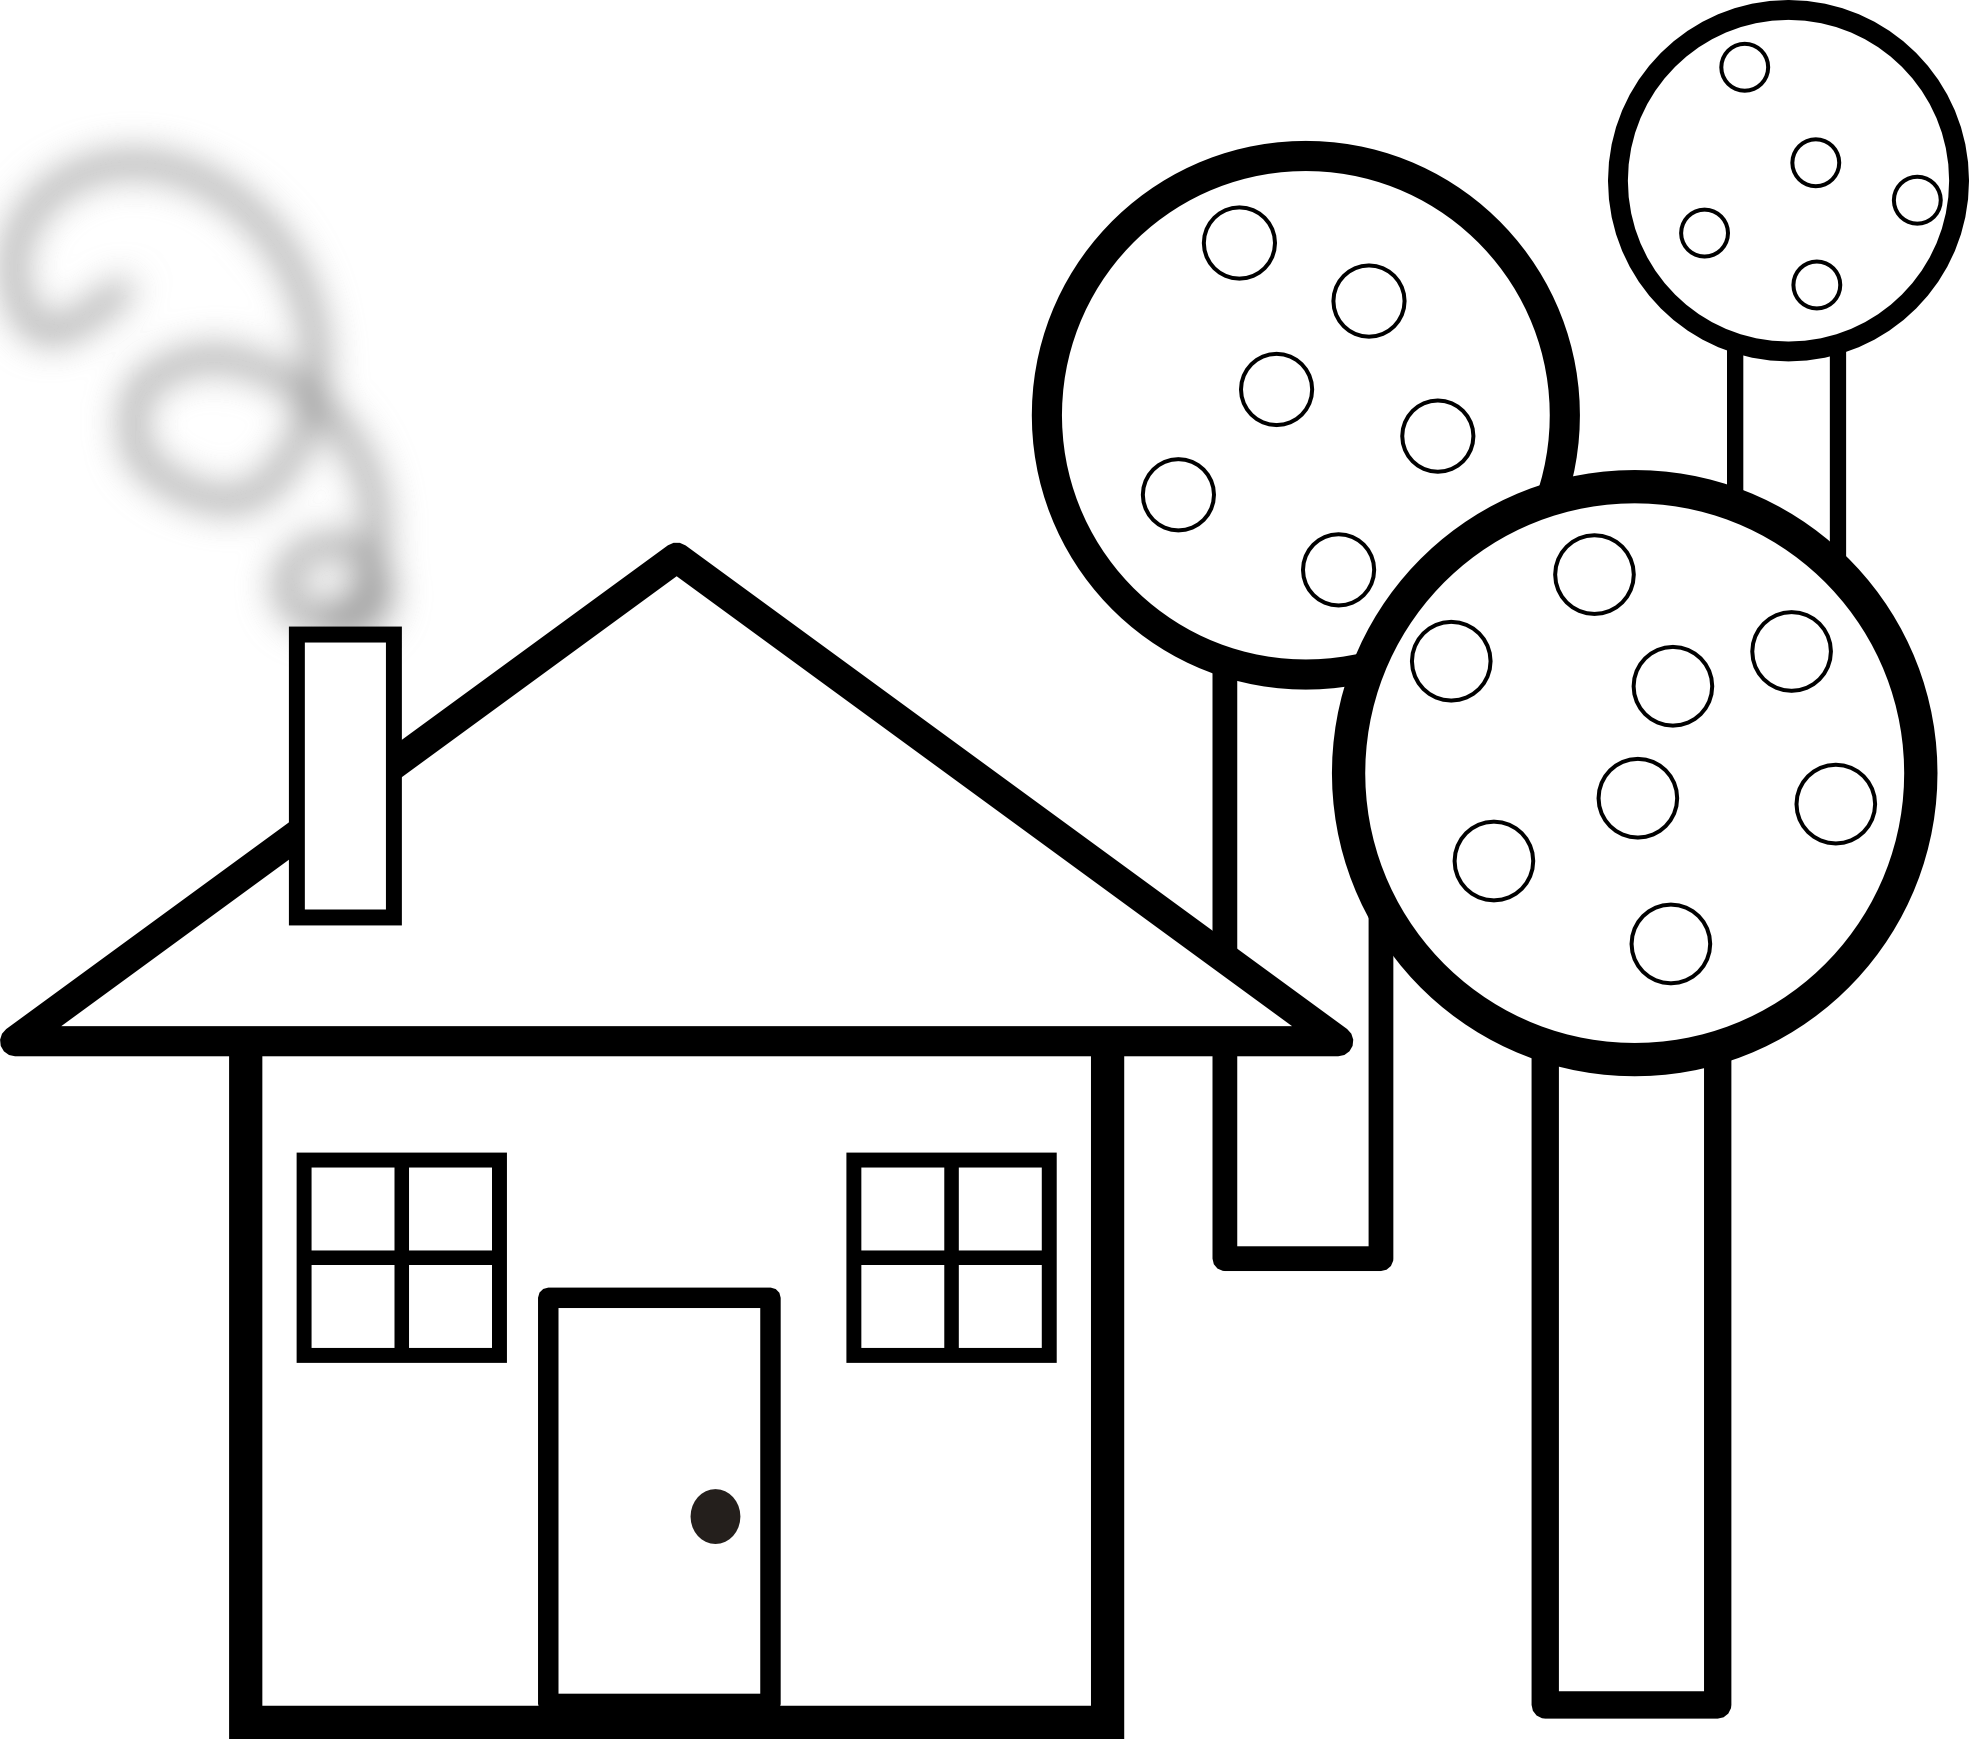 Haunted House Clipart Black And White | Clipart Panda - Free ...